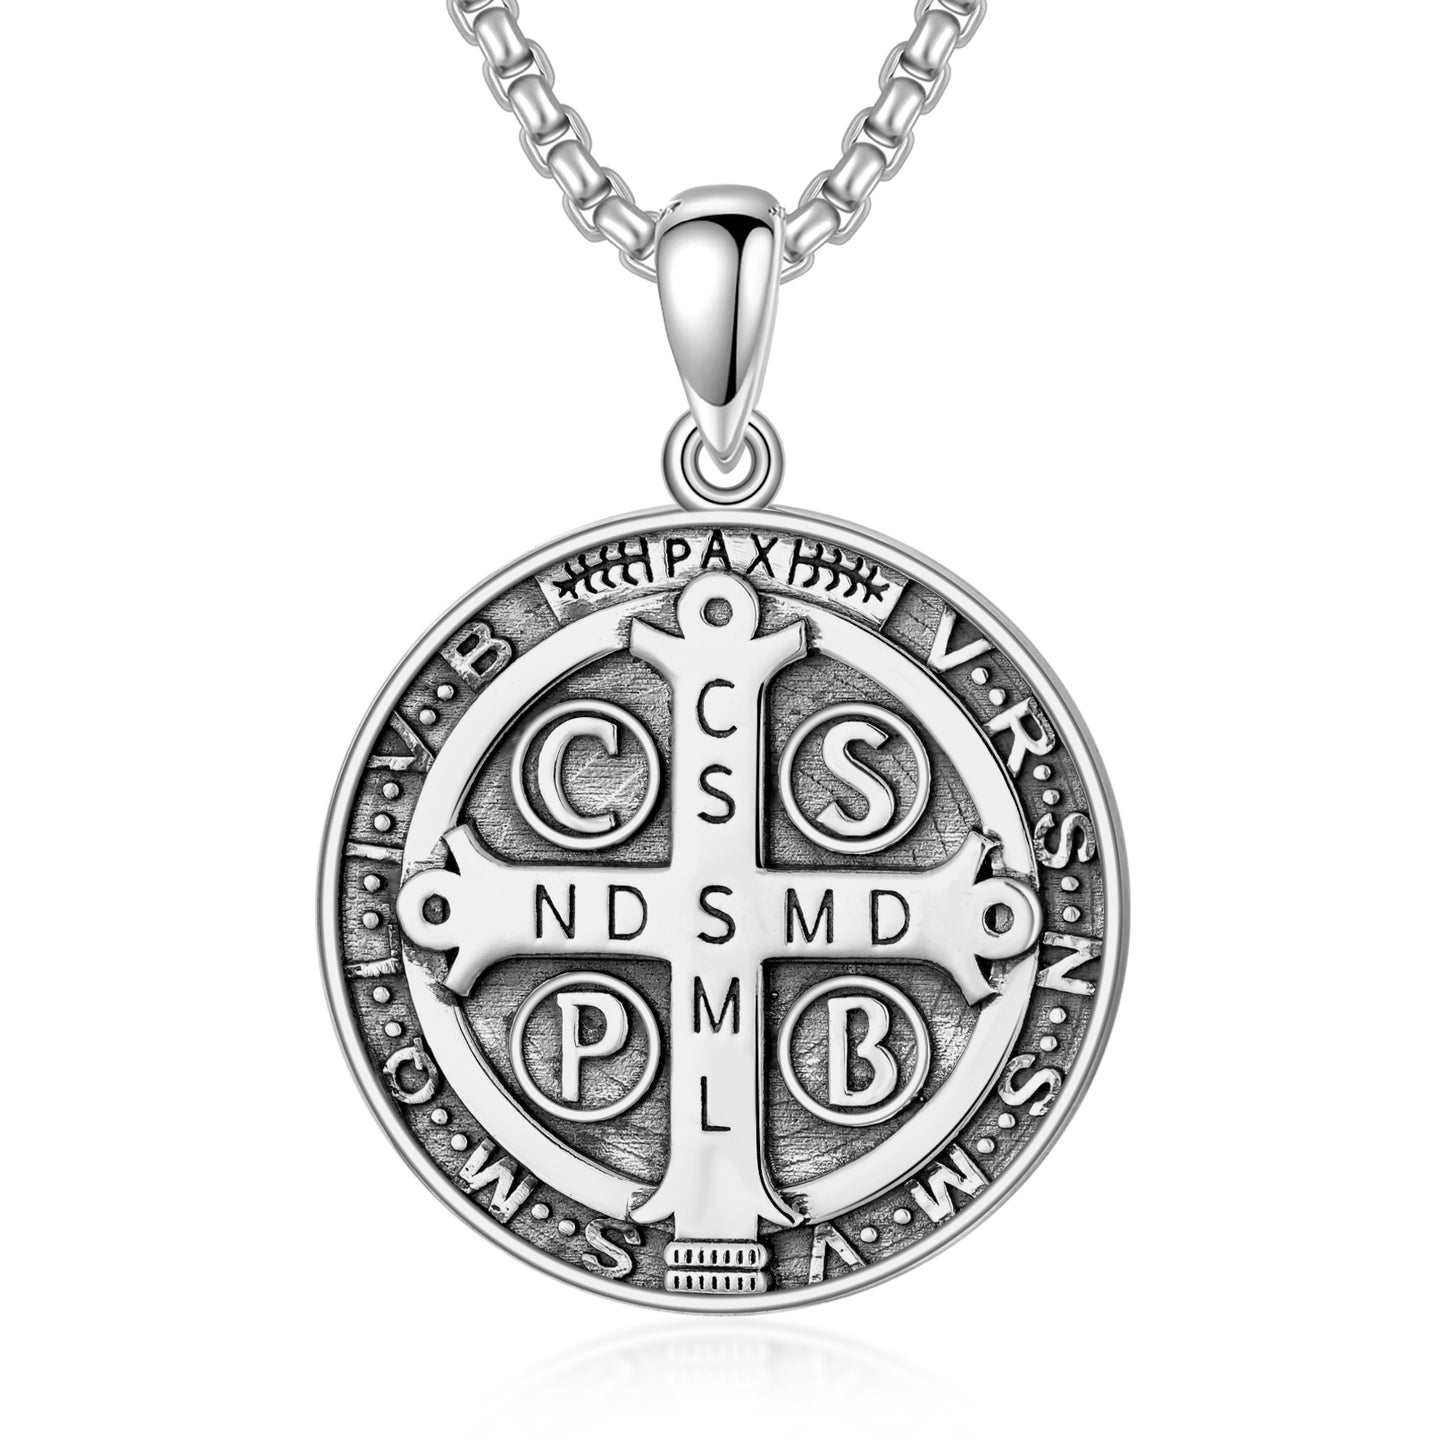 Saint Benedict Necklace NR Cross Catholic Protection Pendant Coin 925 Sterling Silver Jewelry Gifts for Men Women